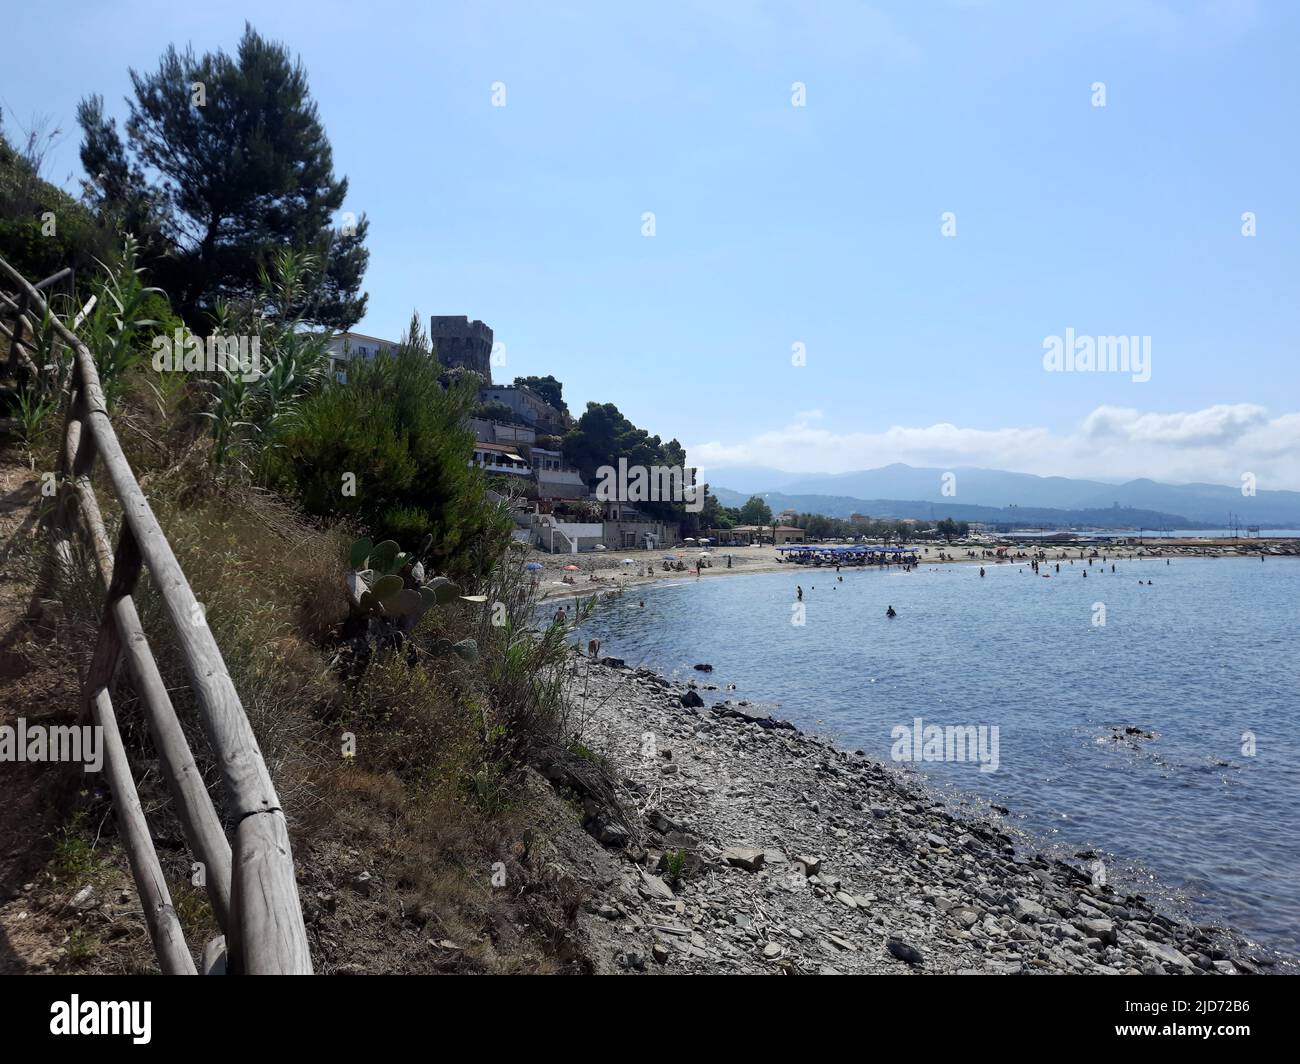 June 17, 2022, Marina di Casal Velino, Salerno, Italy: Marina di Casalvelino, also spelled Casalvelino Marina, is a southern Italian village and hamlet (frazione) of Casal Velino, a municipality in the province of Salerno, Campania. it is the most populated hamlet of its municipality. The village, located next to the ruins of the Ancient Greek city of Velia, grew in population and urban expansion in the last decade of the 20th century, thanks to the tourism in the Cilentan Coast. The port of Marina is served by the hydrofoil's line MM6W Naples-Sorrento-Marina di Camerota, part of a local passe Stock Photo